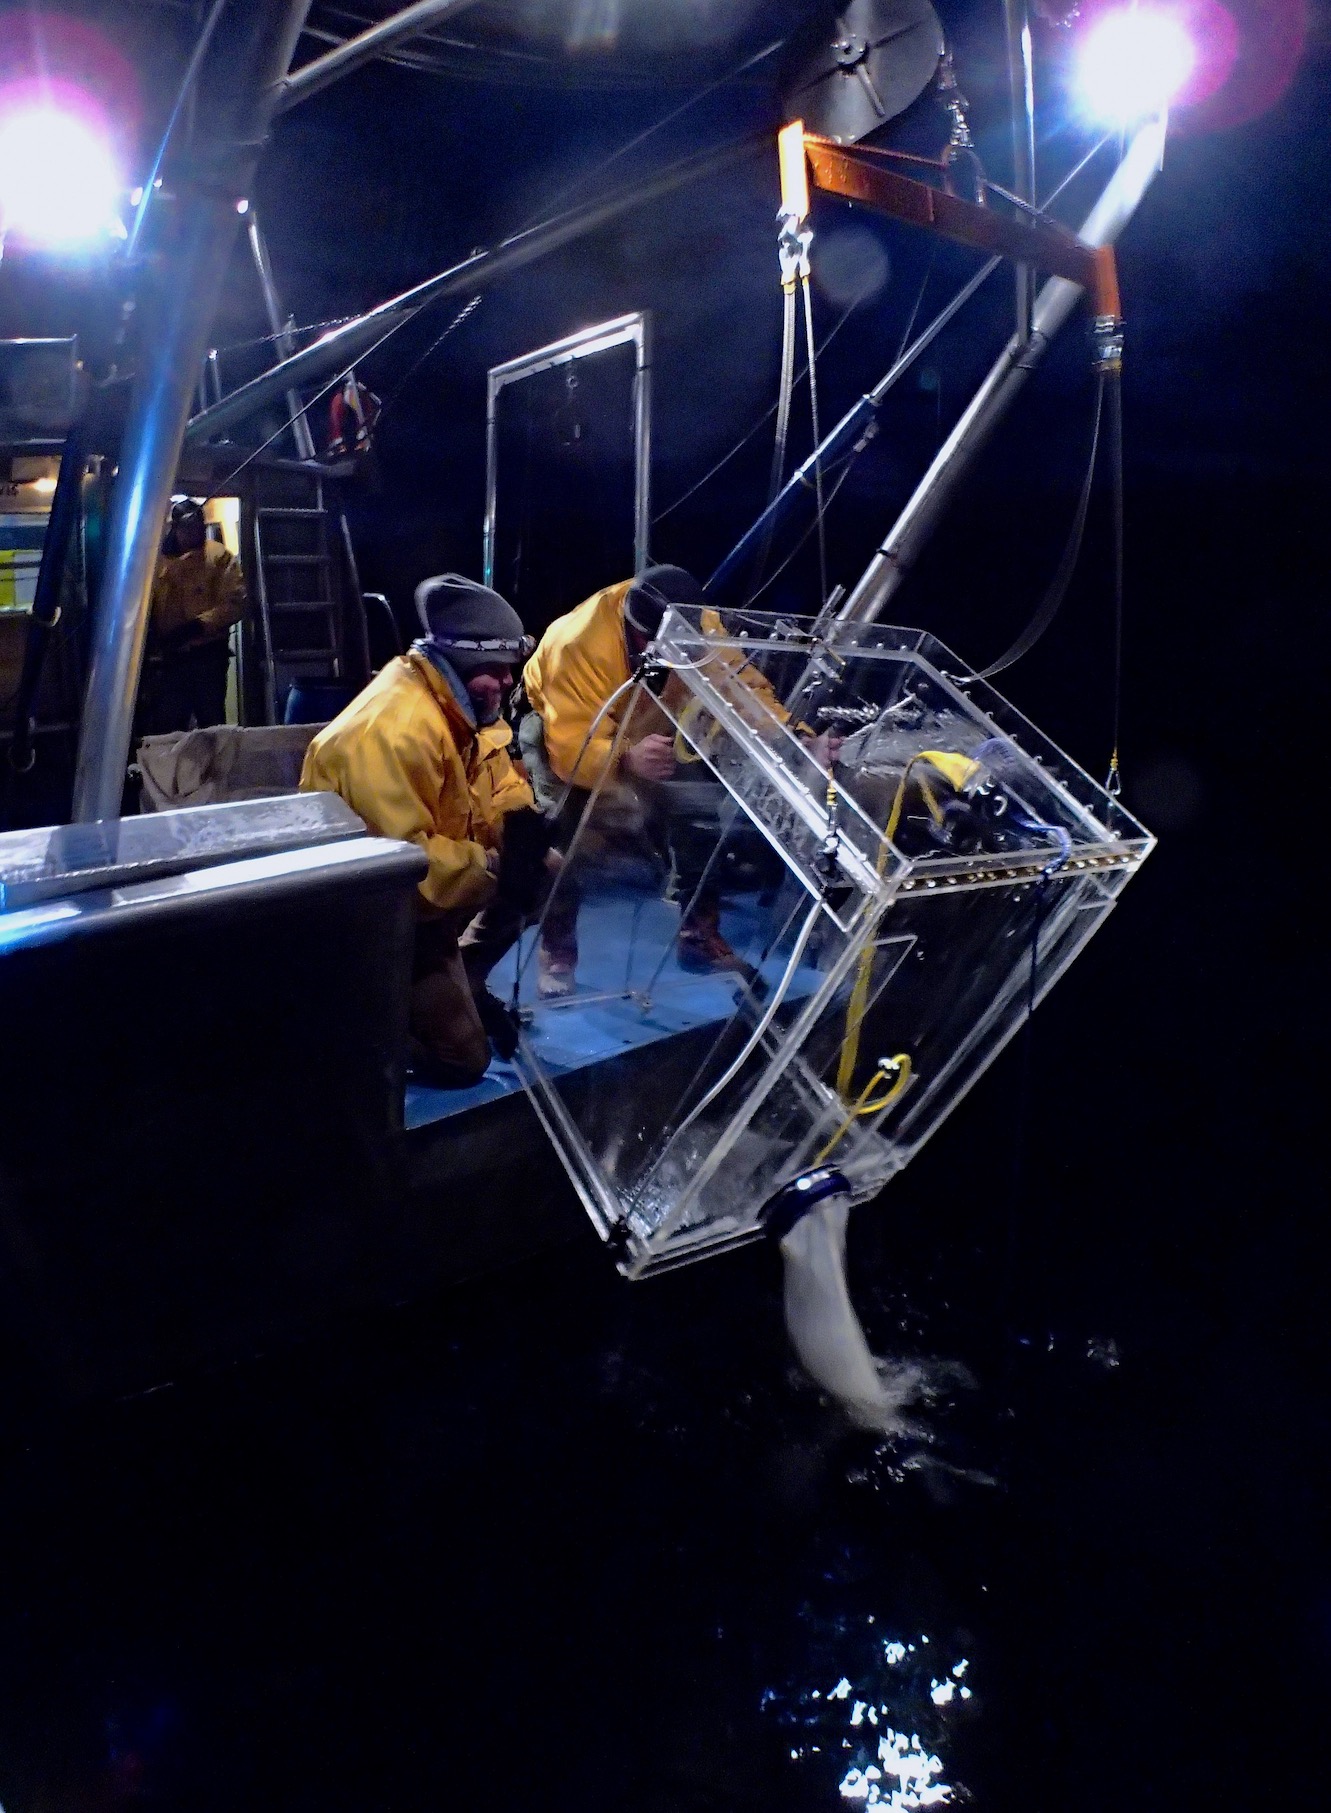 Two scientists bring in cage while trawling for mysis shrimp at night at Lake Tahoe